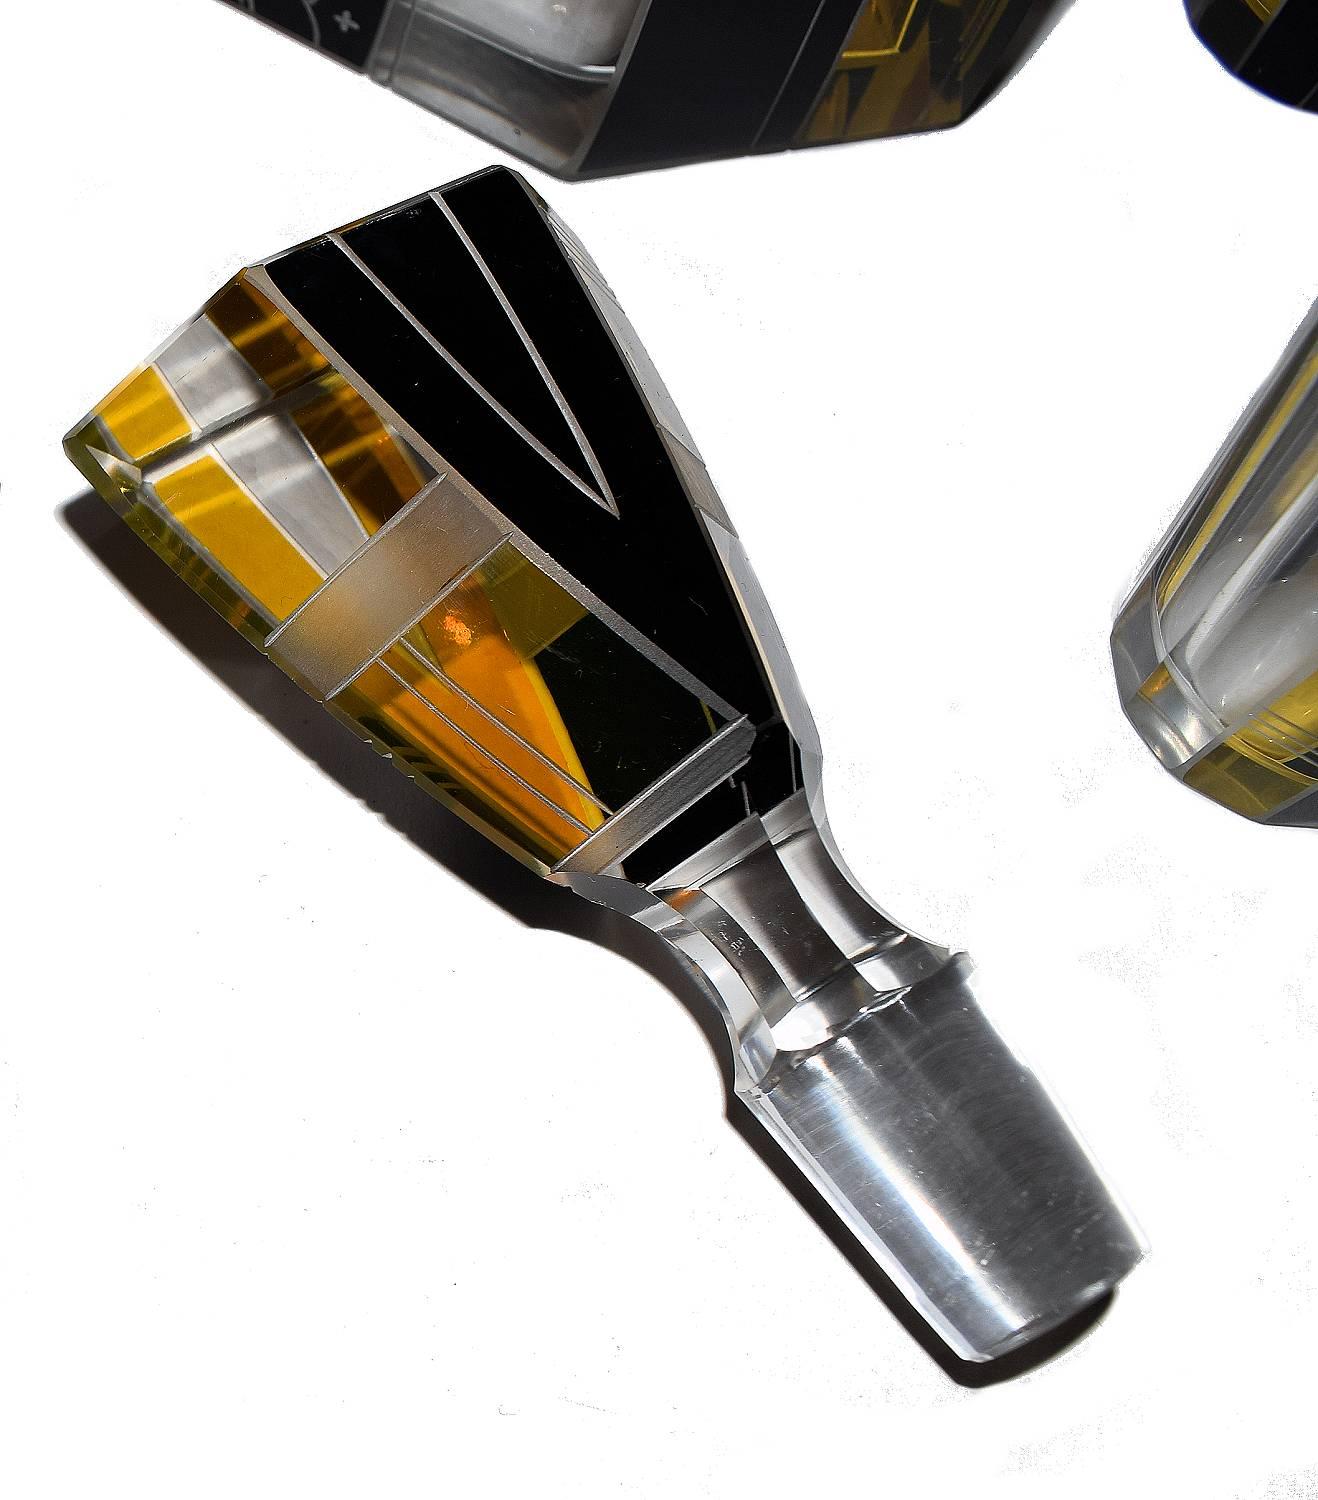 Fabulous Art Deco glass decanter set by Karl Palda. One of the more rarer designs with Fine enamel geometric decoration in yellow and black with etched detailing. Comprises a decanter, it's stopper and six glasses all in perfect condition, can't